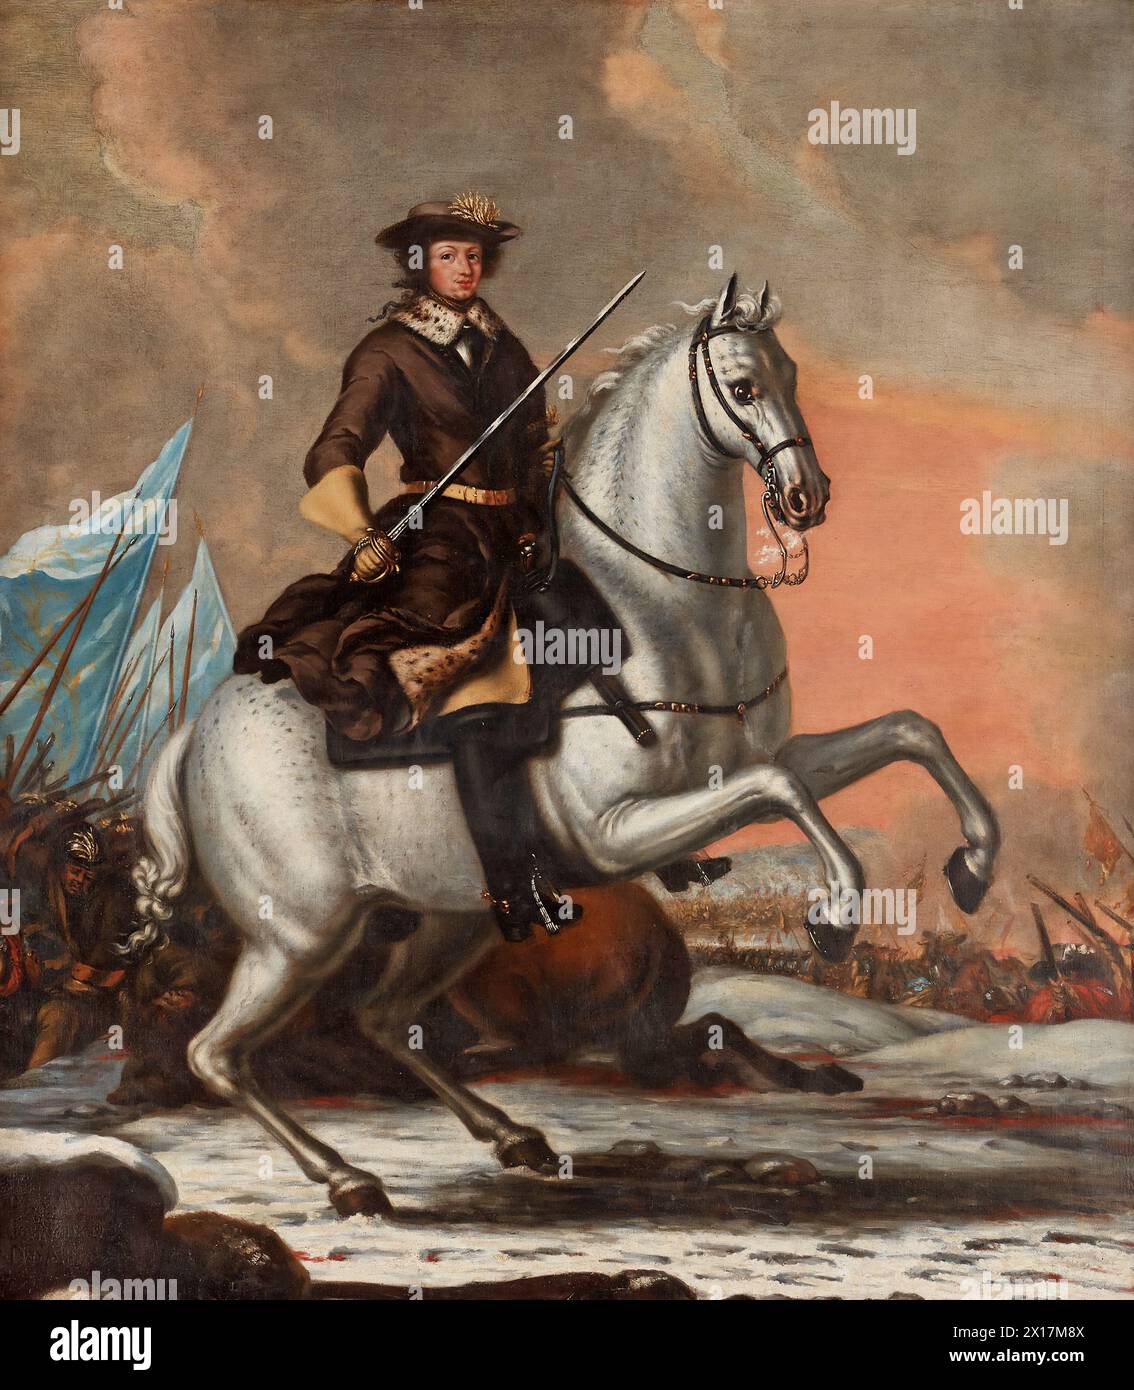 Charles XI of Sweden, 1655-1697, king of Sweden Stock Photo